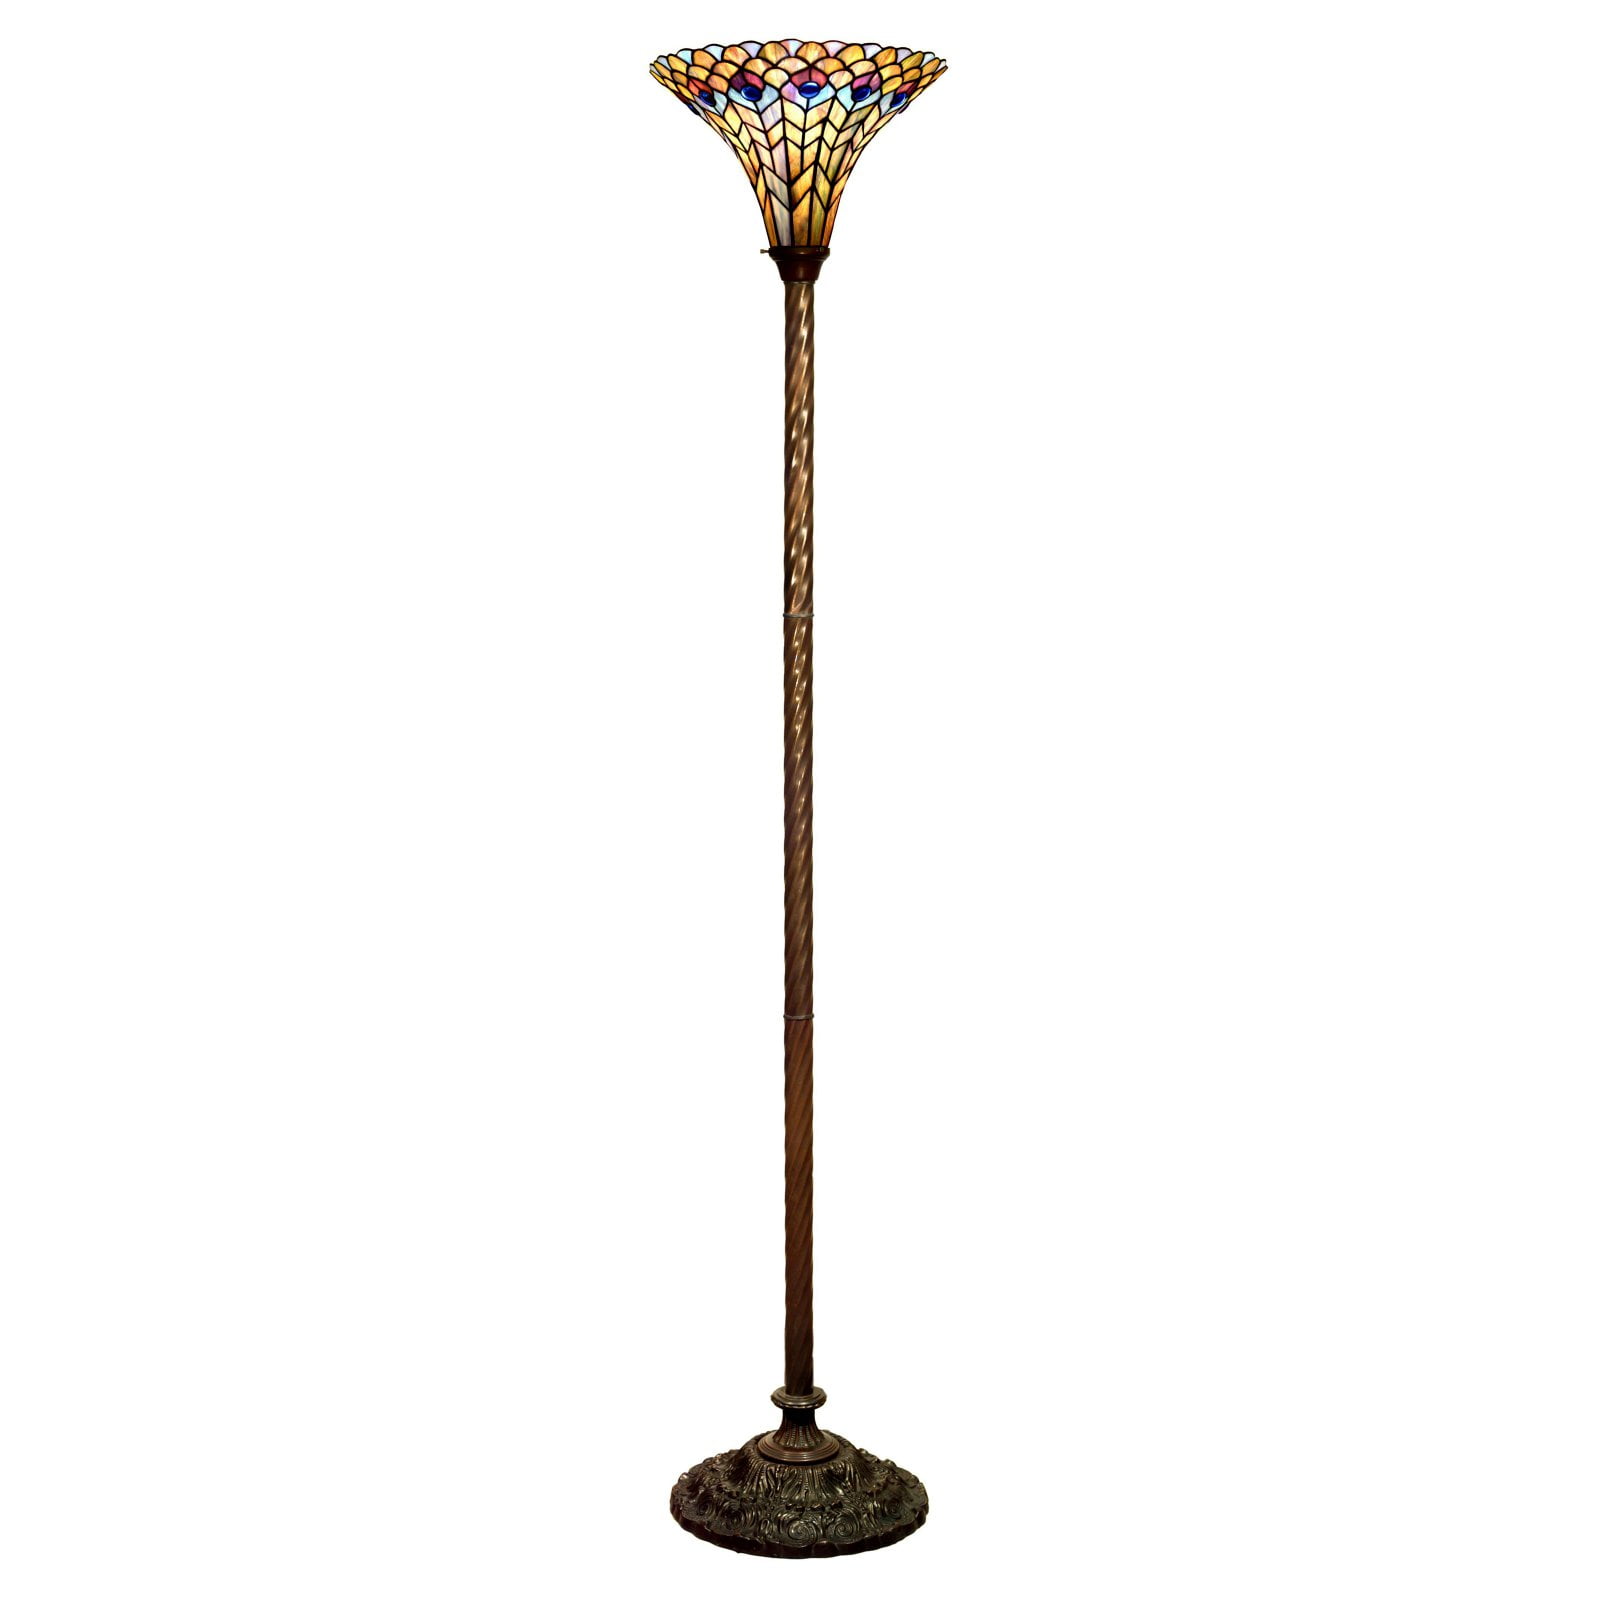 Tiffany Style Peacock Torchiere Lamp